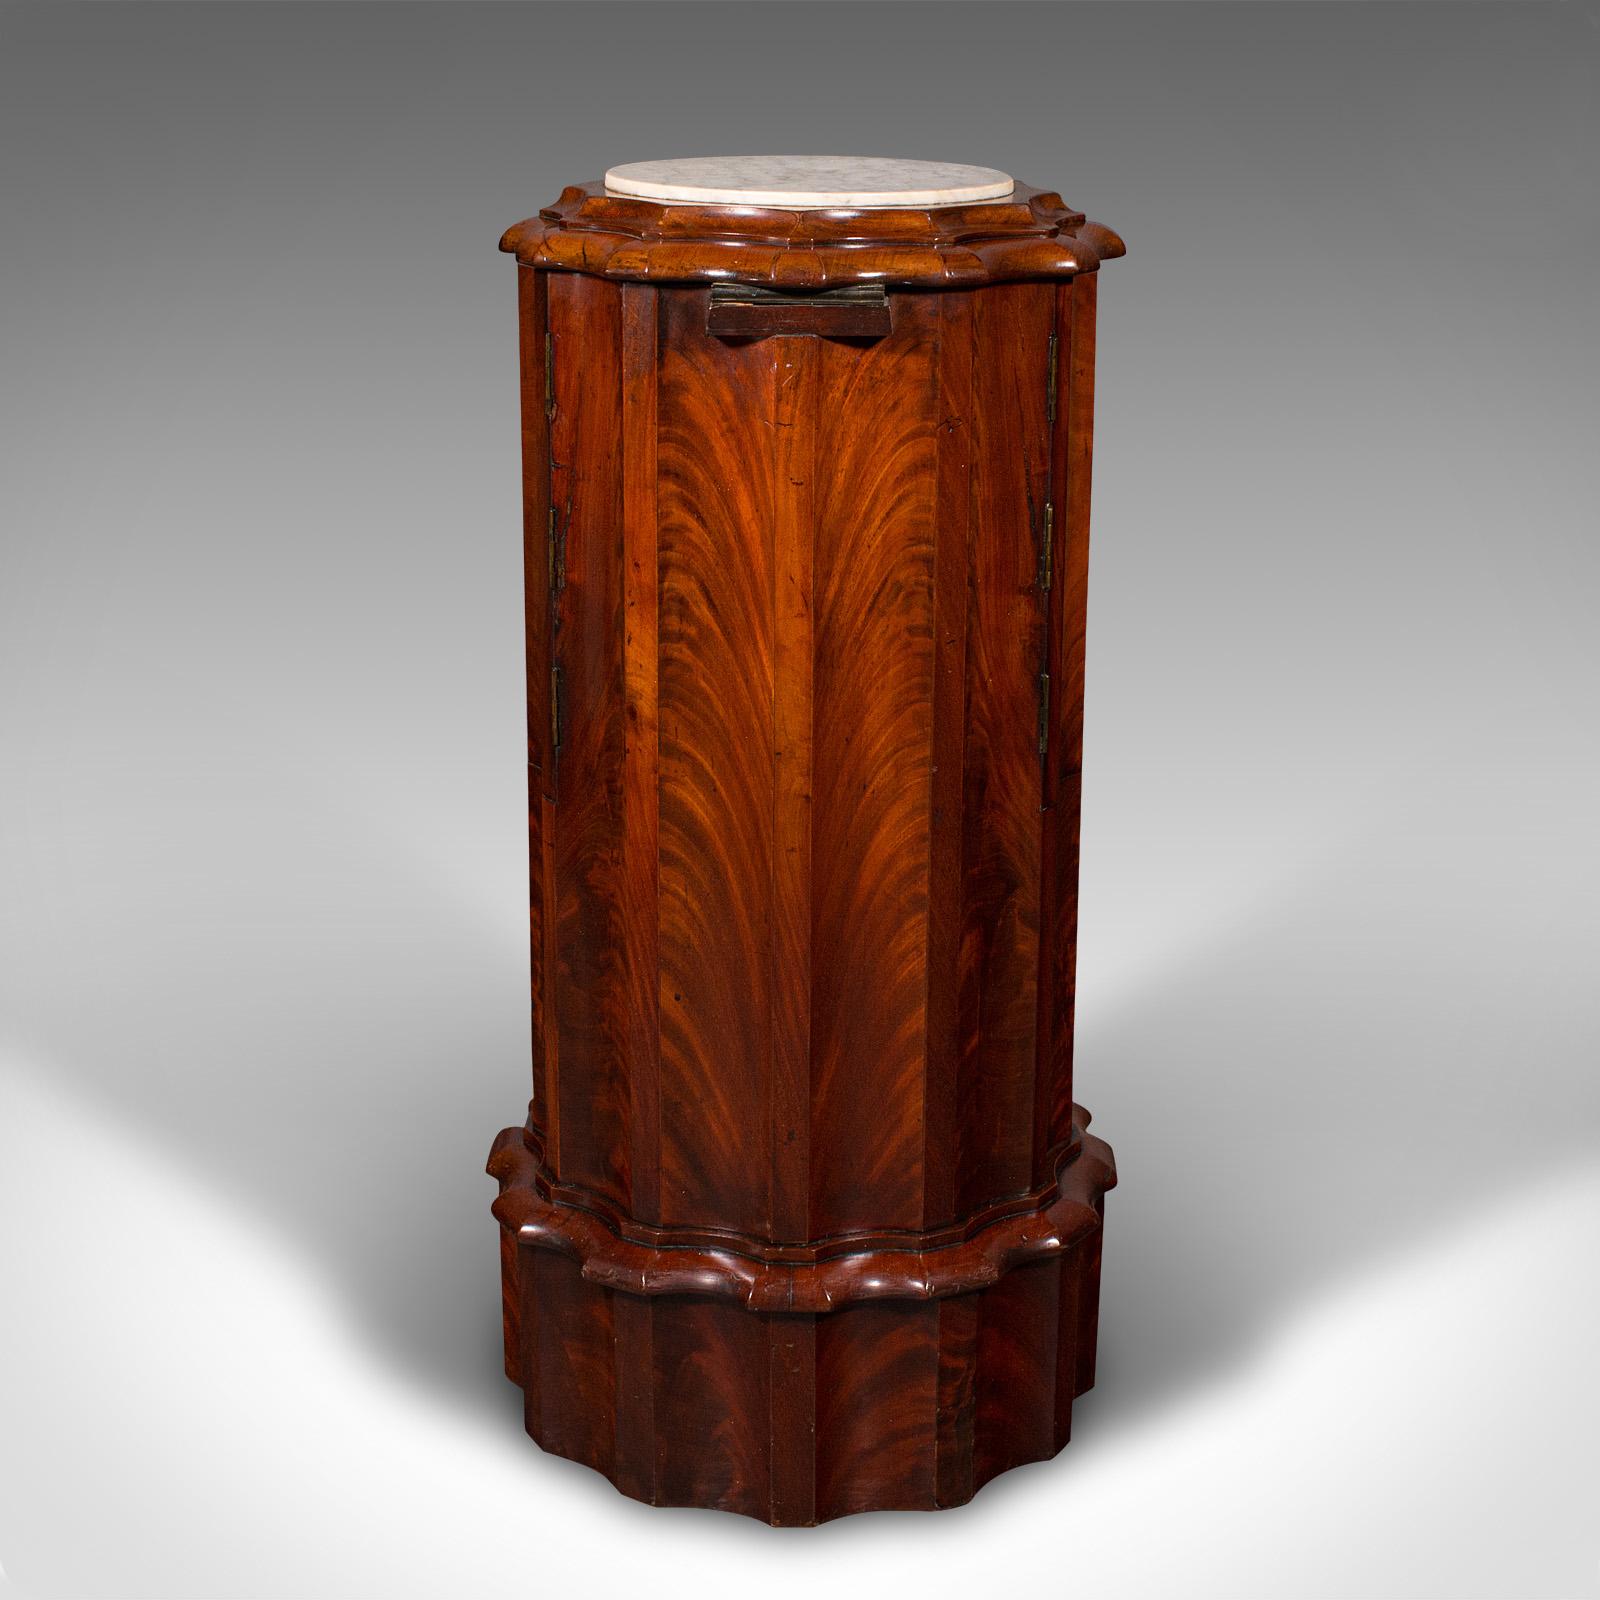 Marble Antique Personal Bedside Nightstand, English Jardiniere Stand, Victorian, C.1860 For Sale